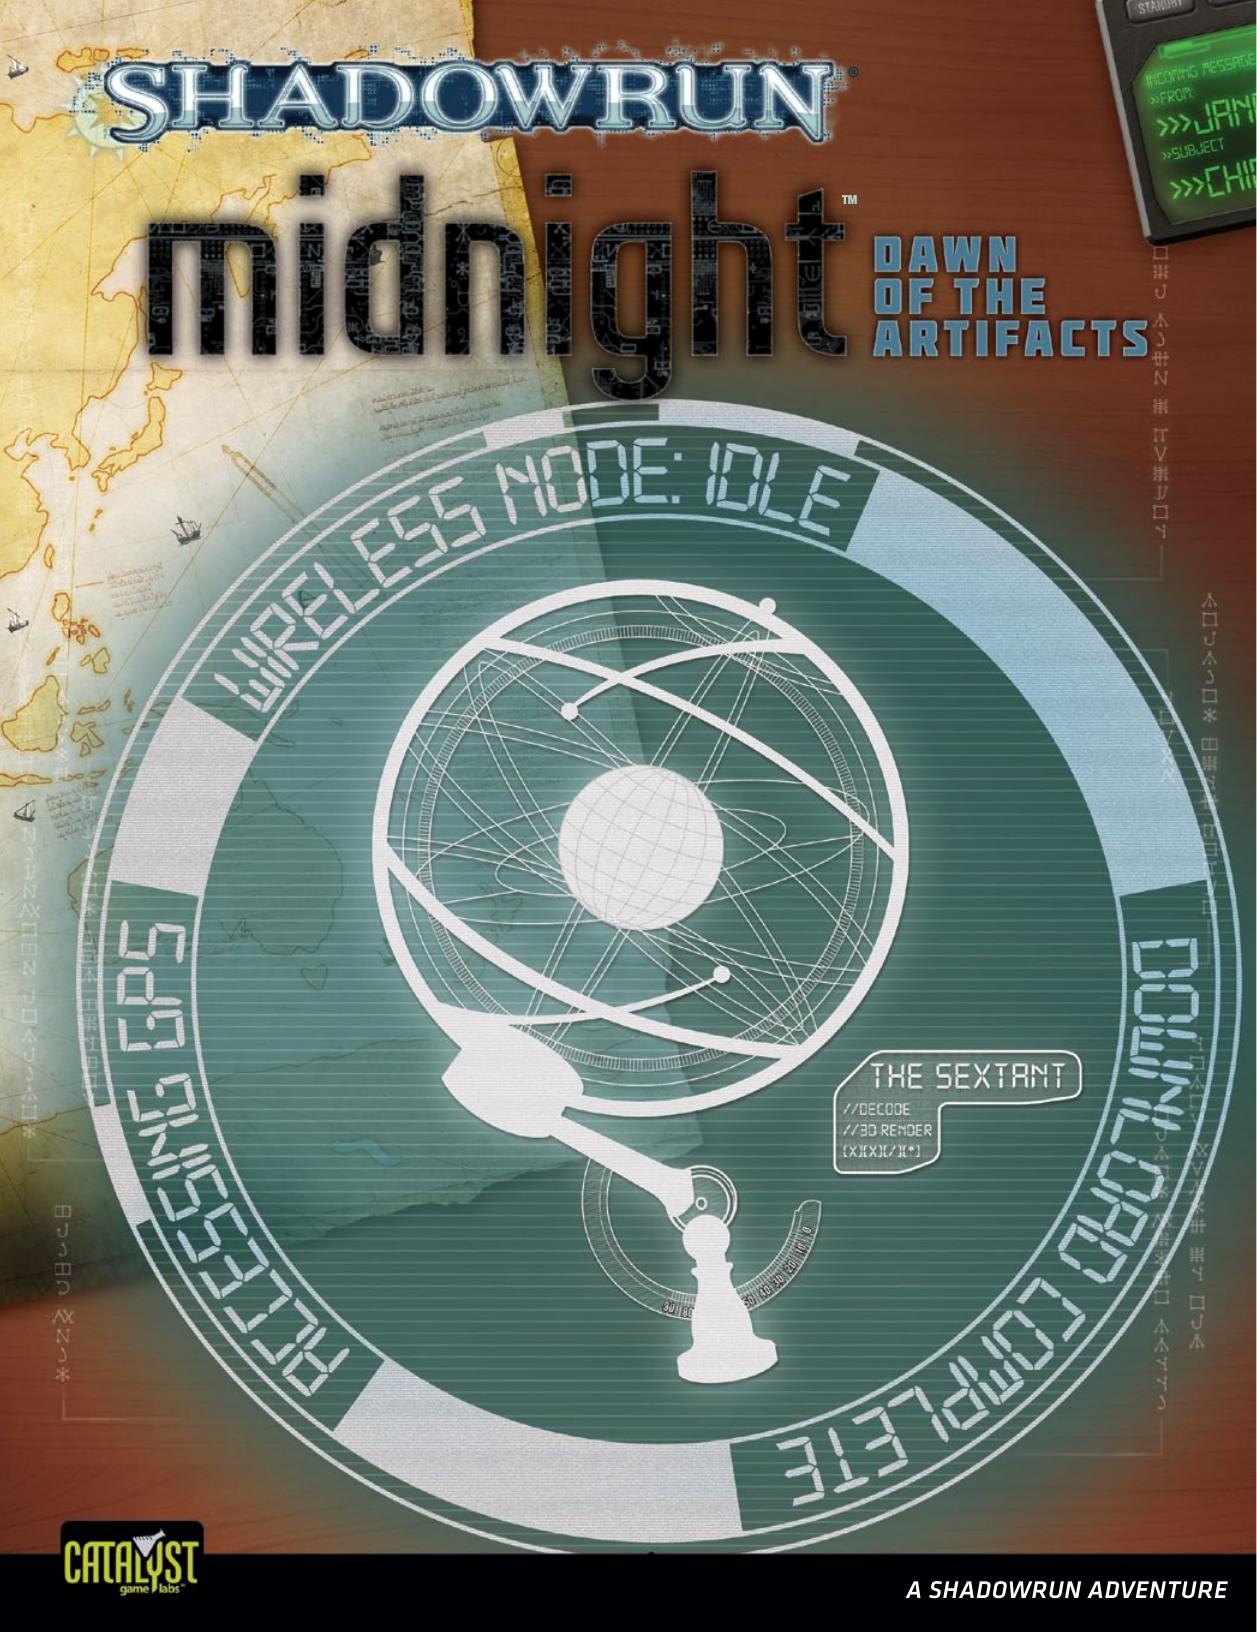 Midnight: Dawn of the Artifacts